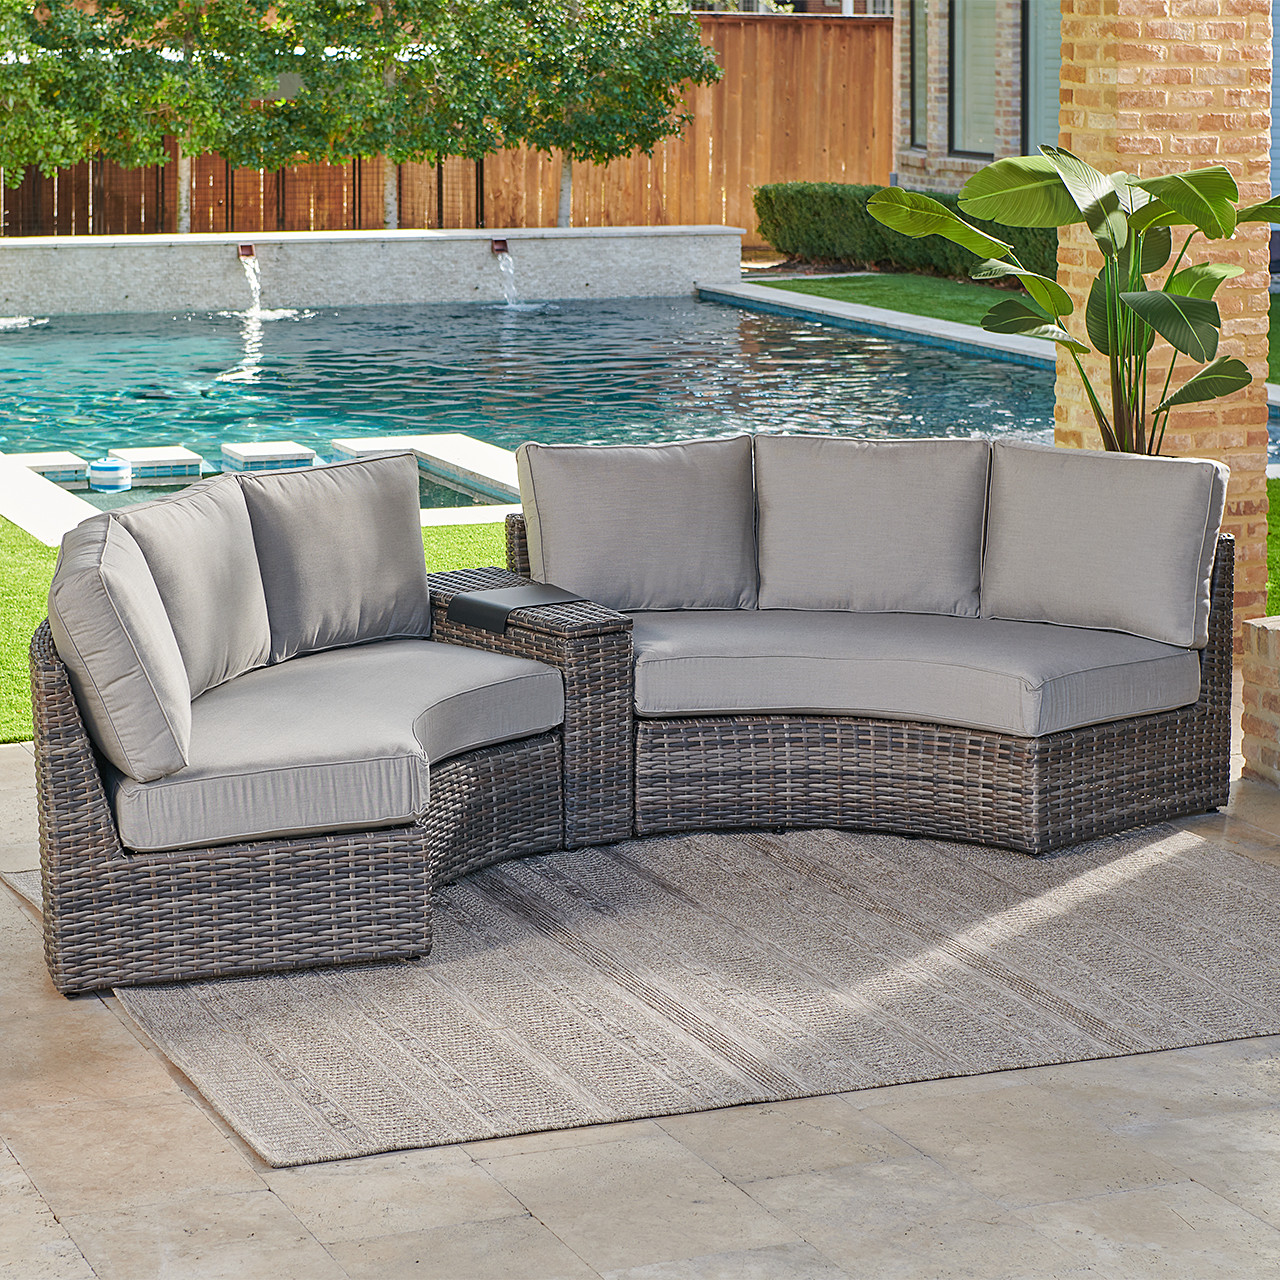 San Lucas Outdoor Wicker with Cushions 3 Piece Sofa Contour Sectional Group